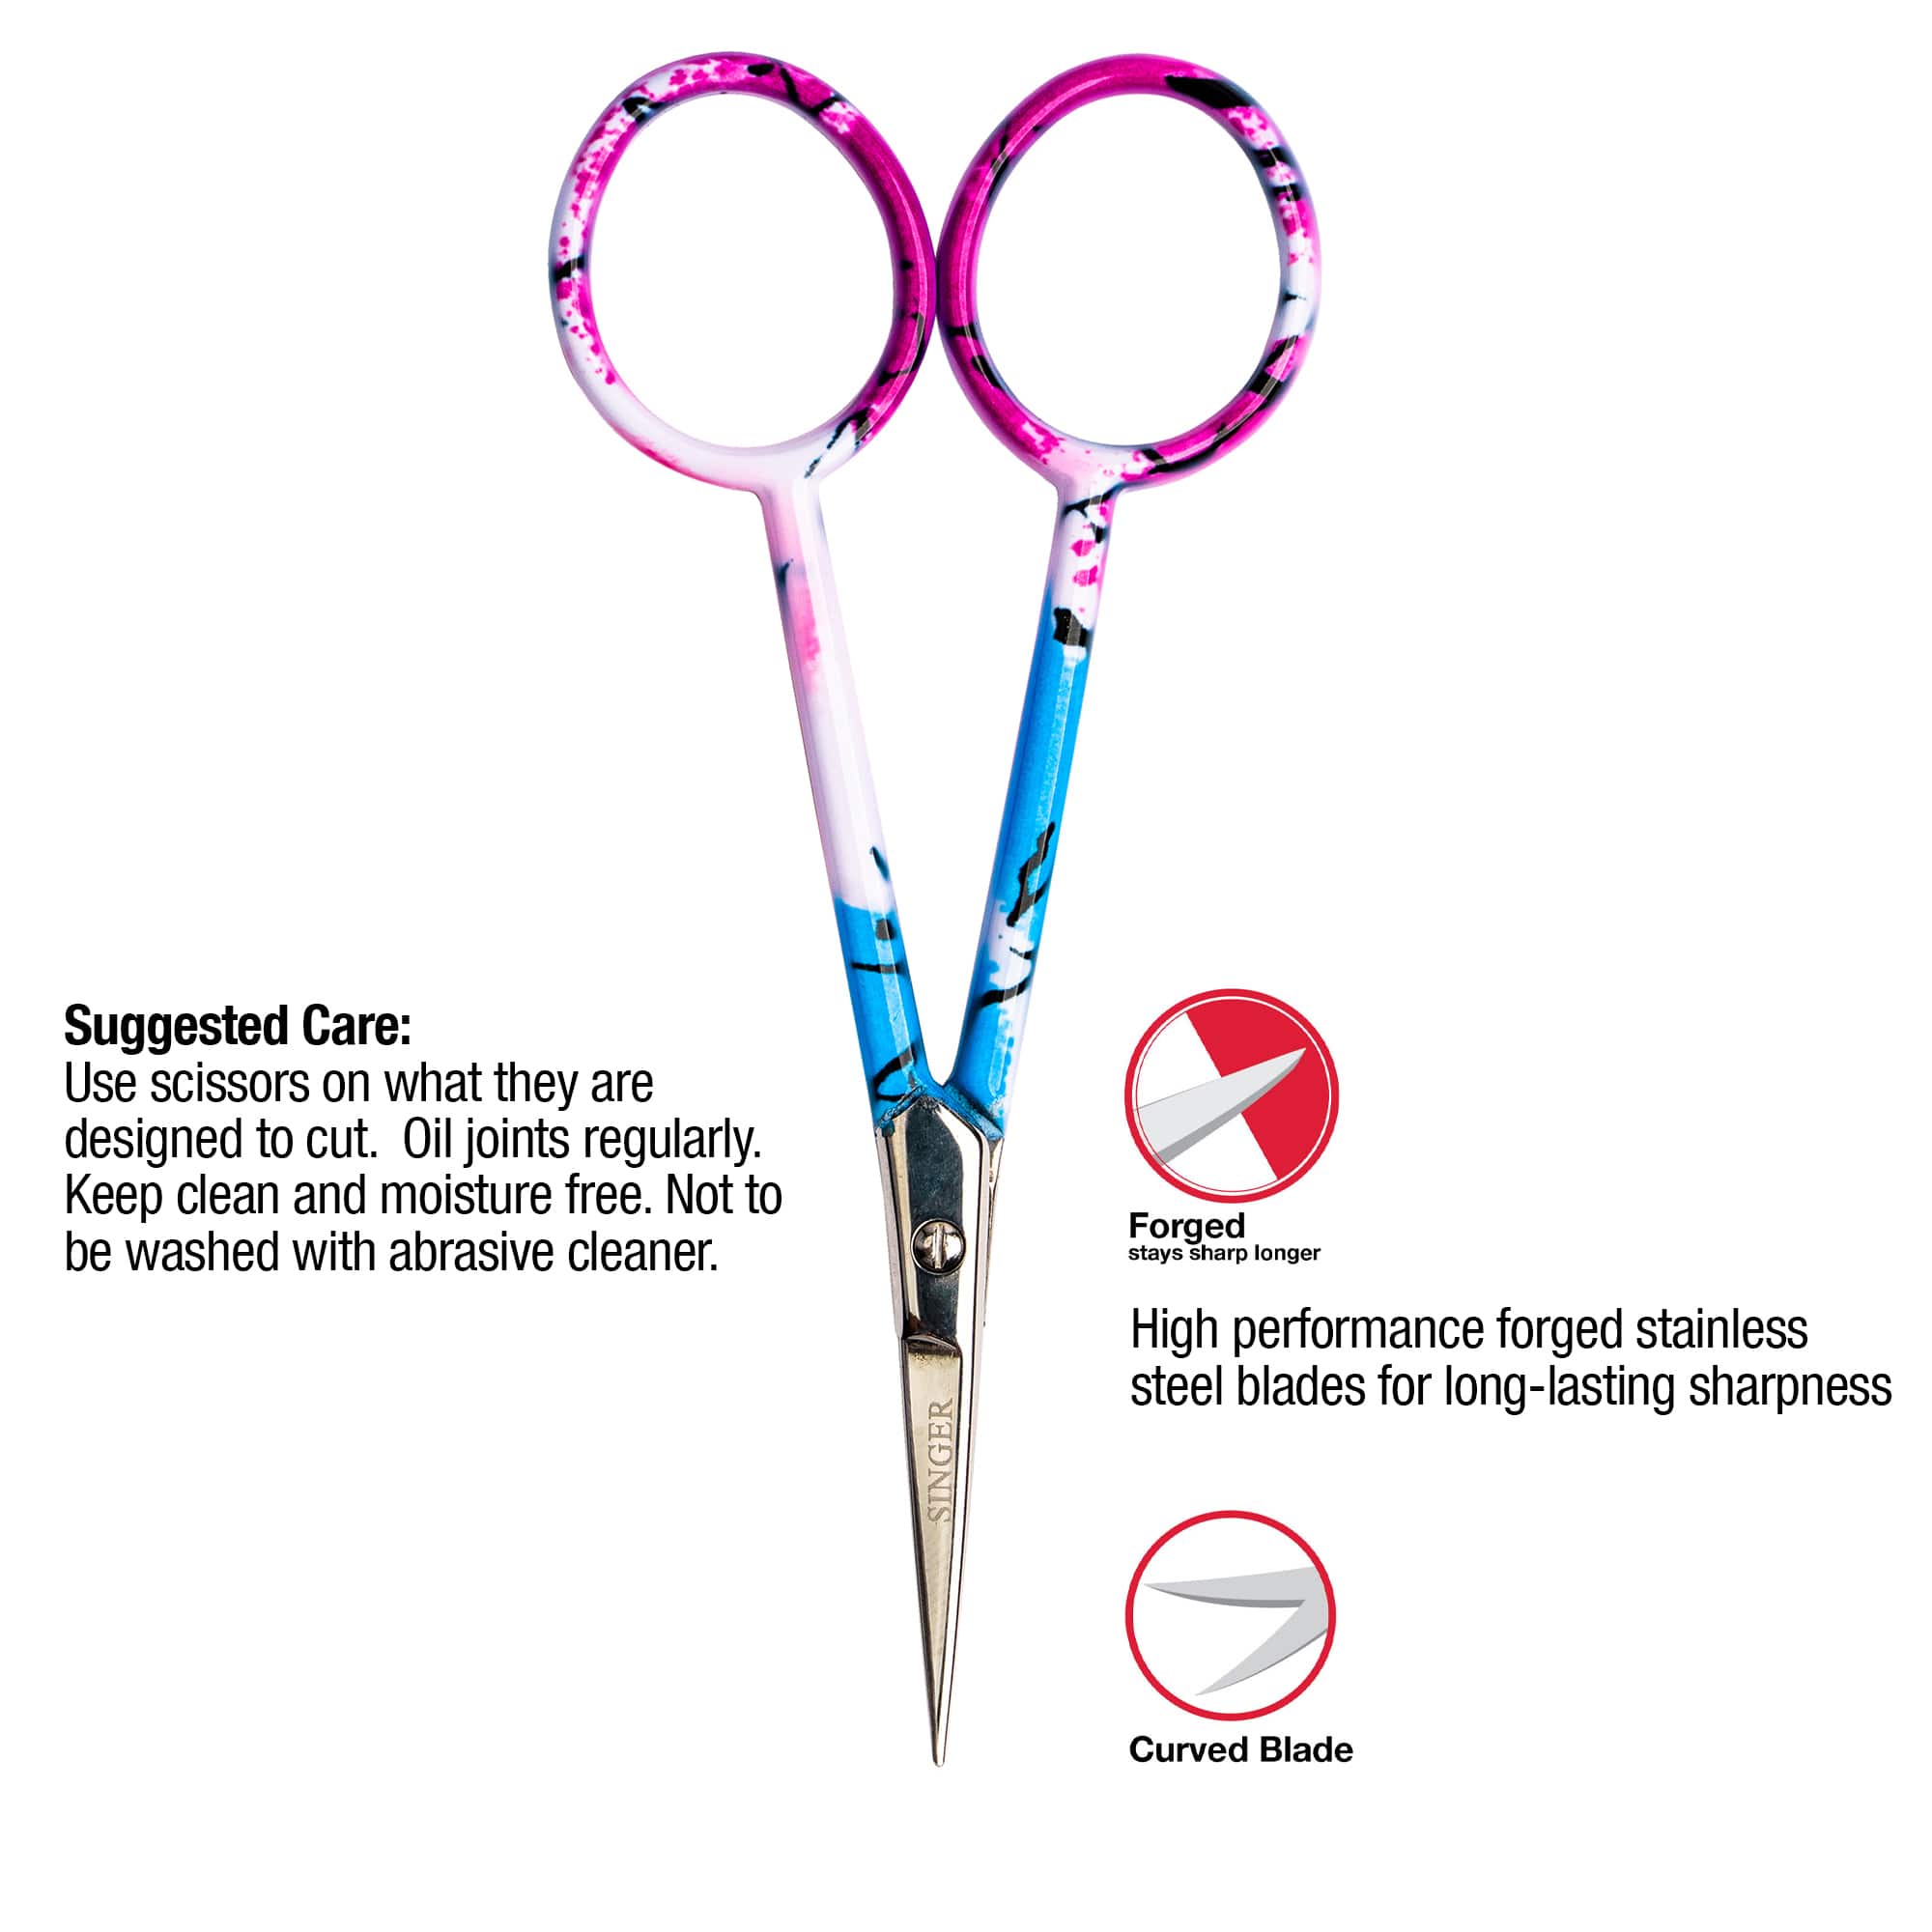 SINGER&#xAE; 4&#x27;&#x27; Curved Tip Forged Embroidery Scissors with Printed Handles, 3ct.